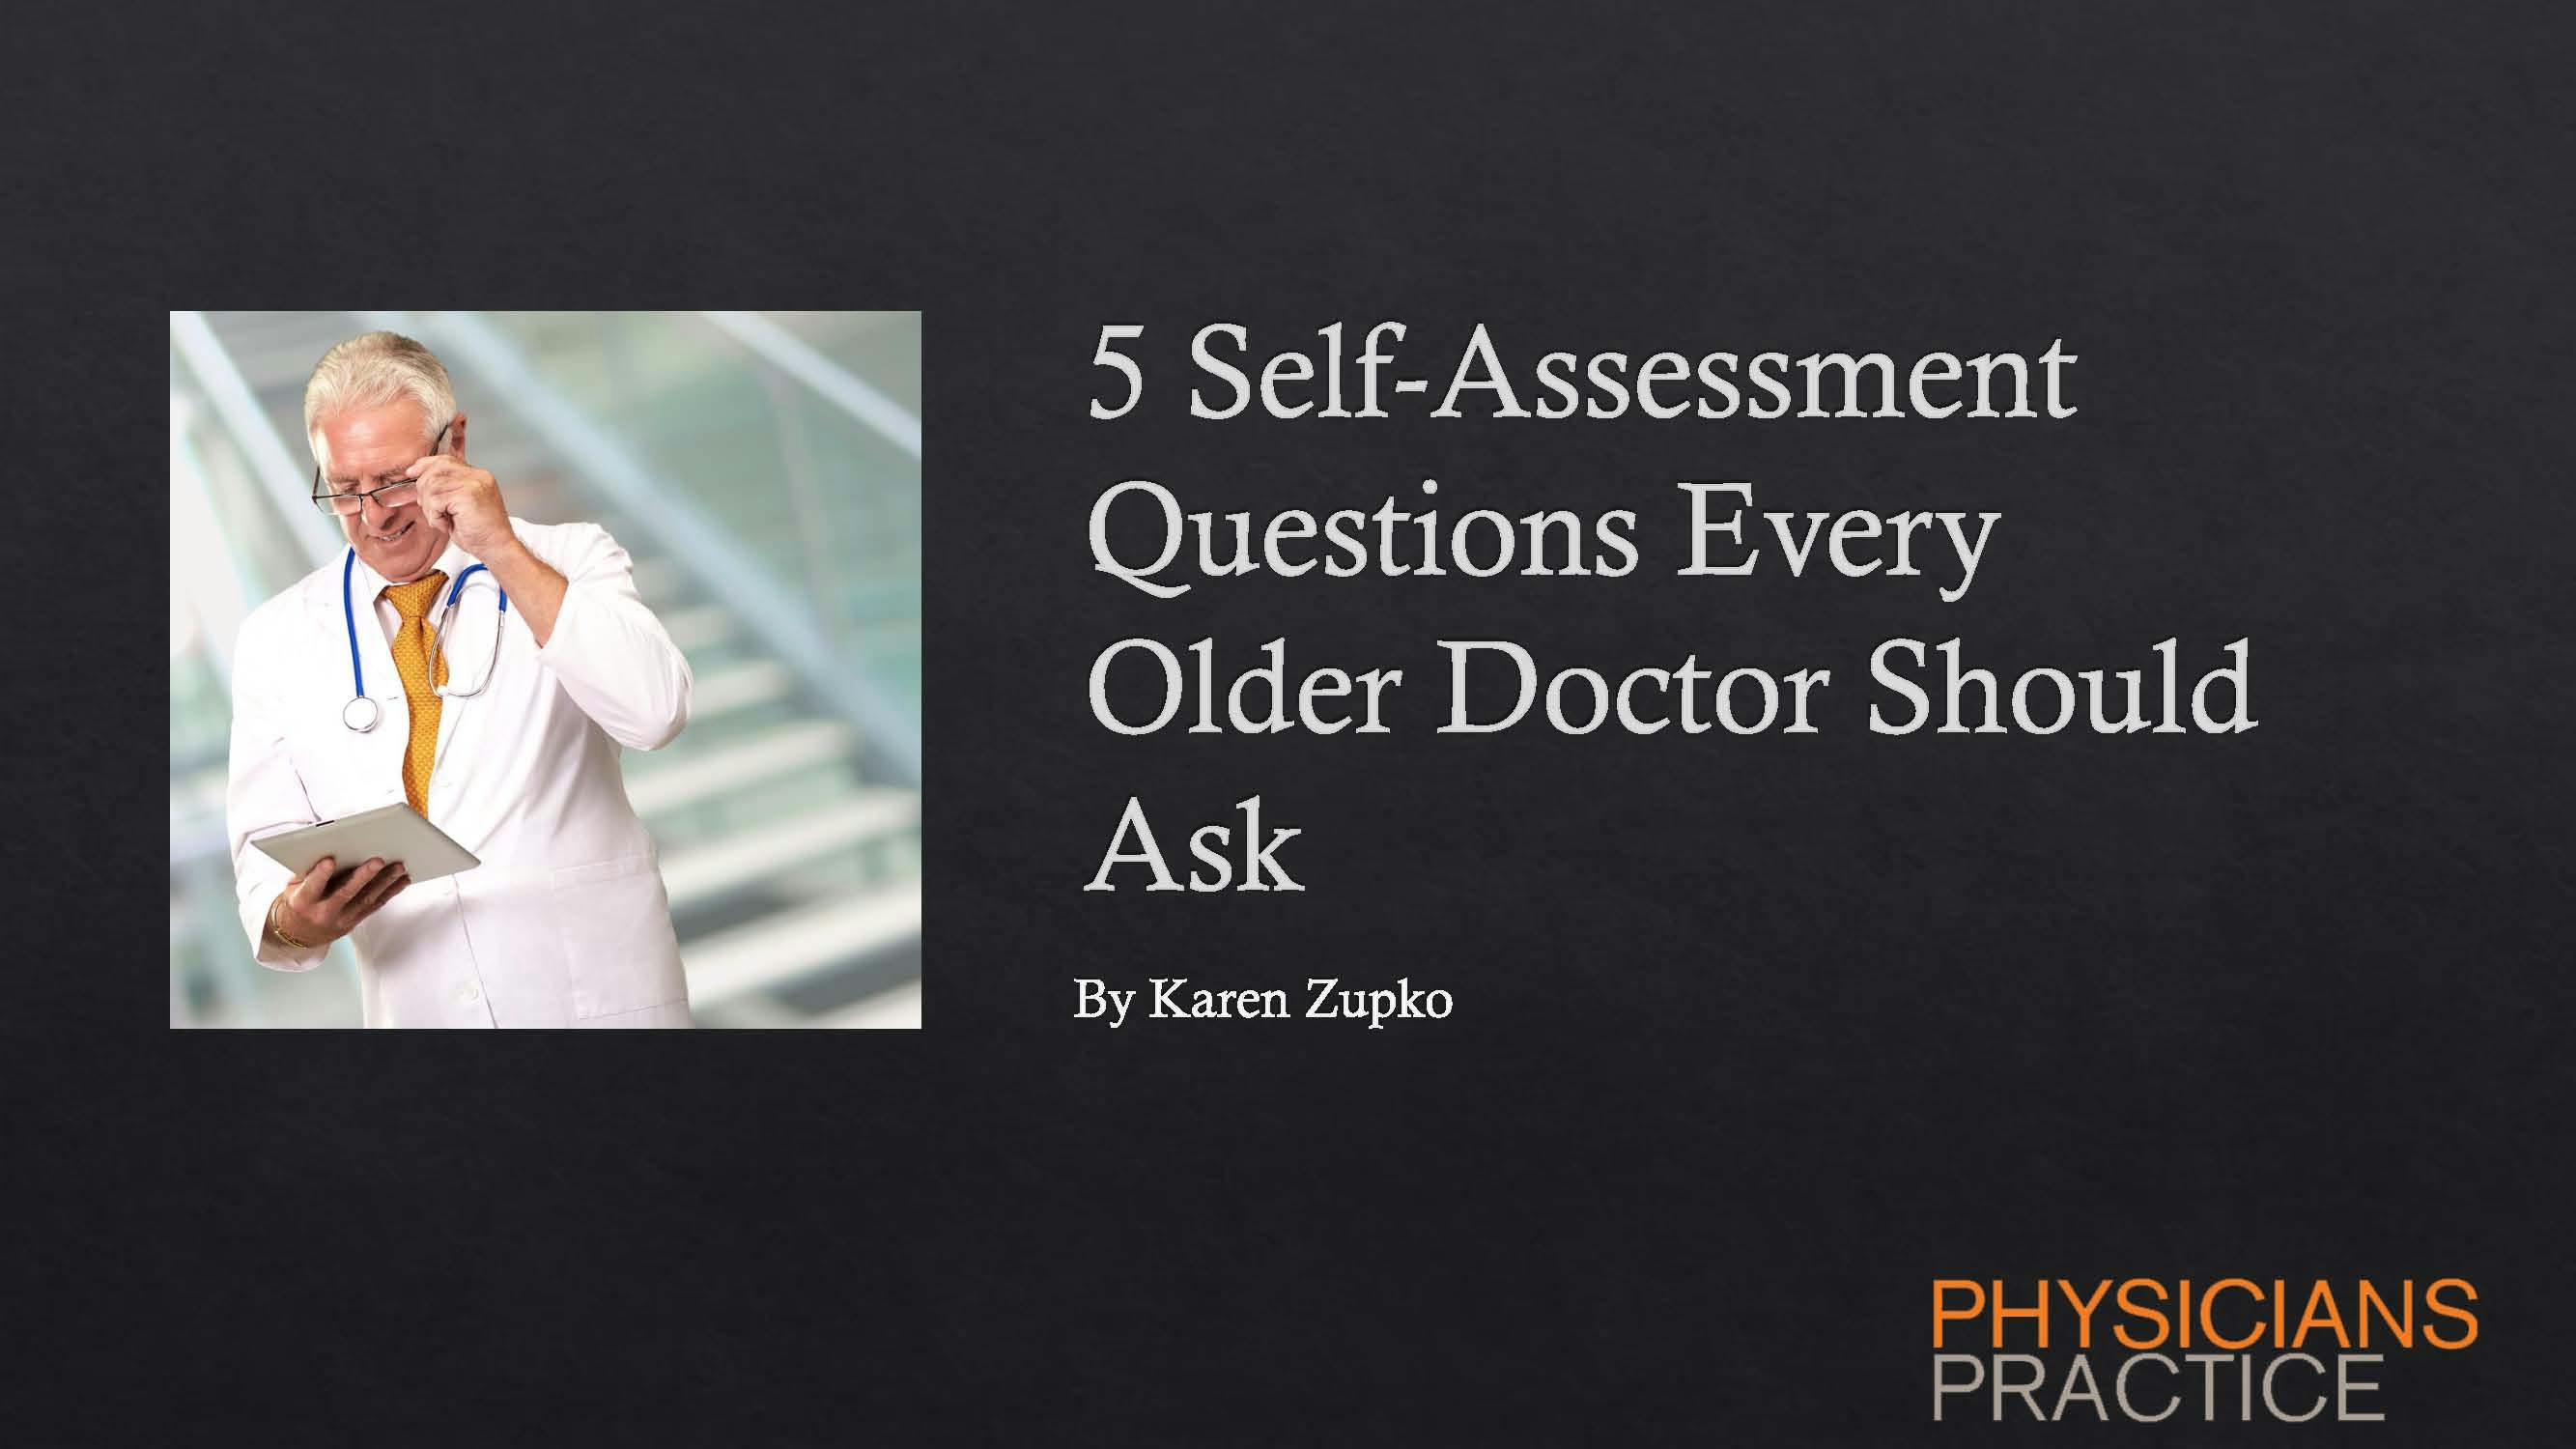 5 Self-Assessment Questions Every Older Doctor Should Ask